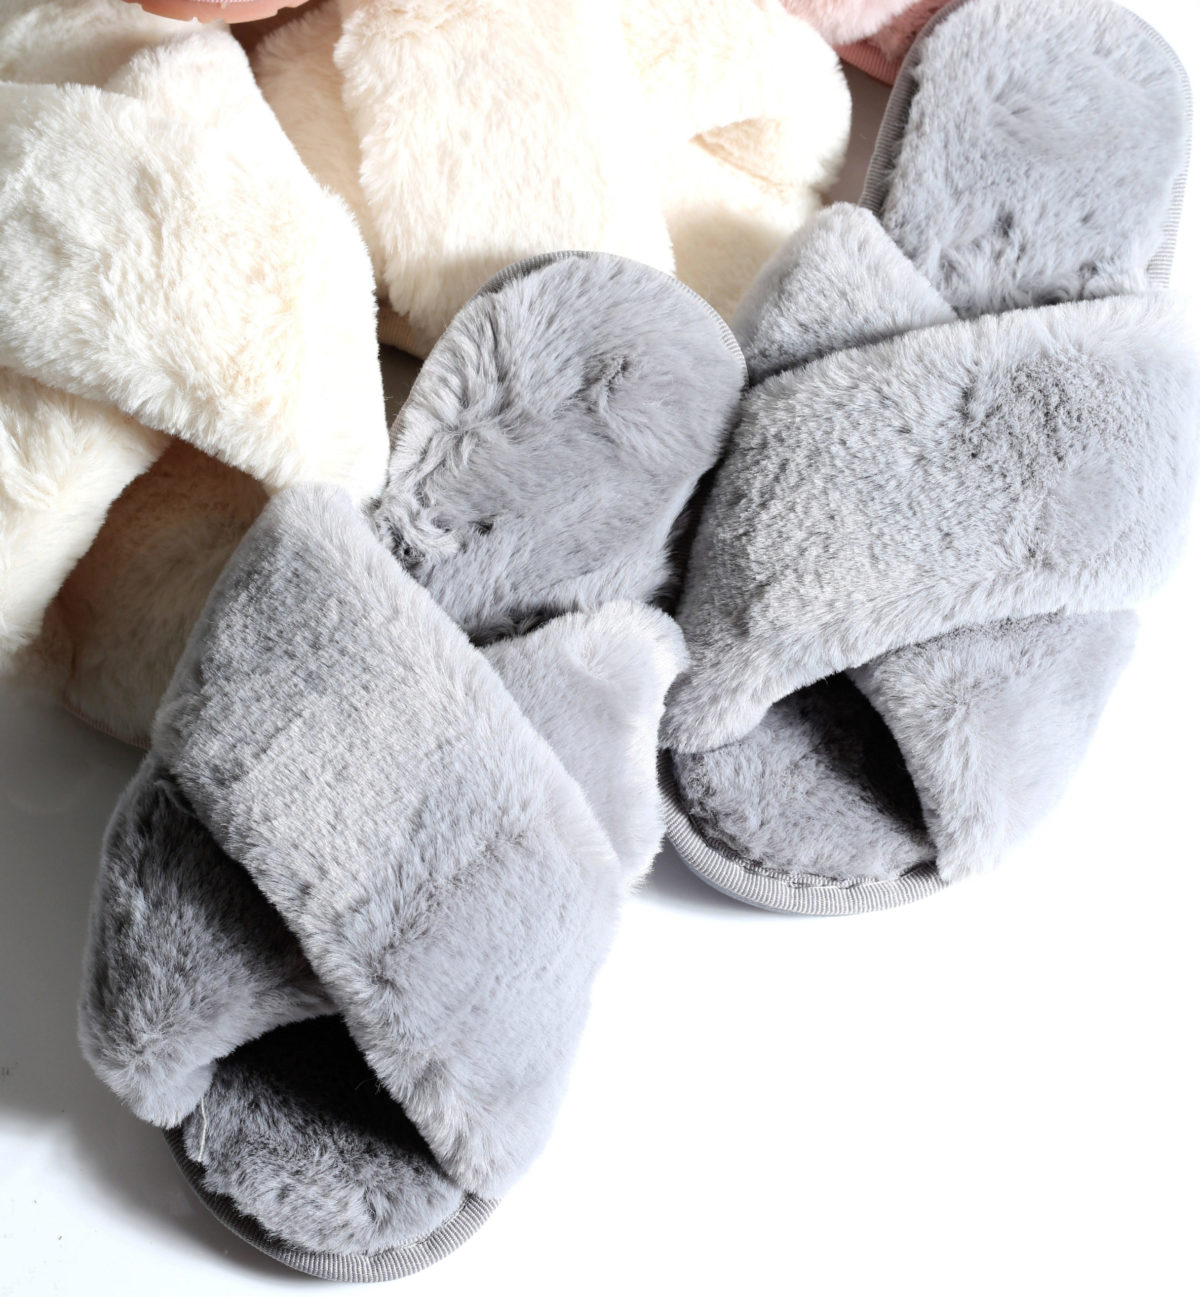 Two pairs of fluffy slippers in grey and cream